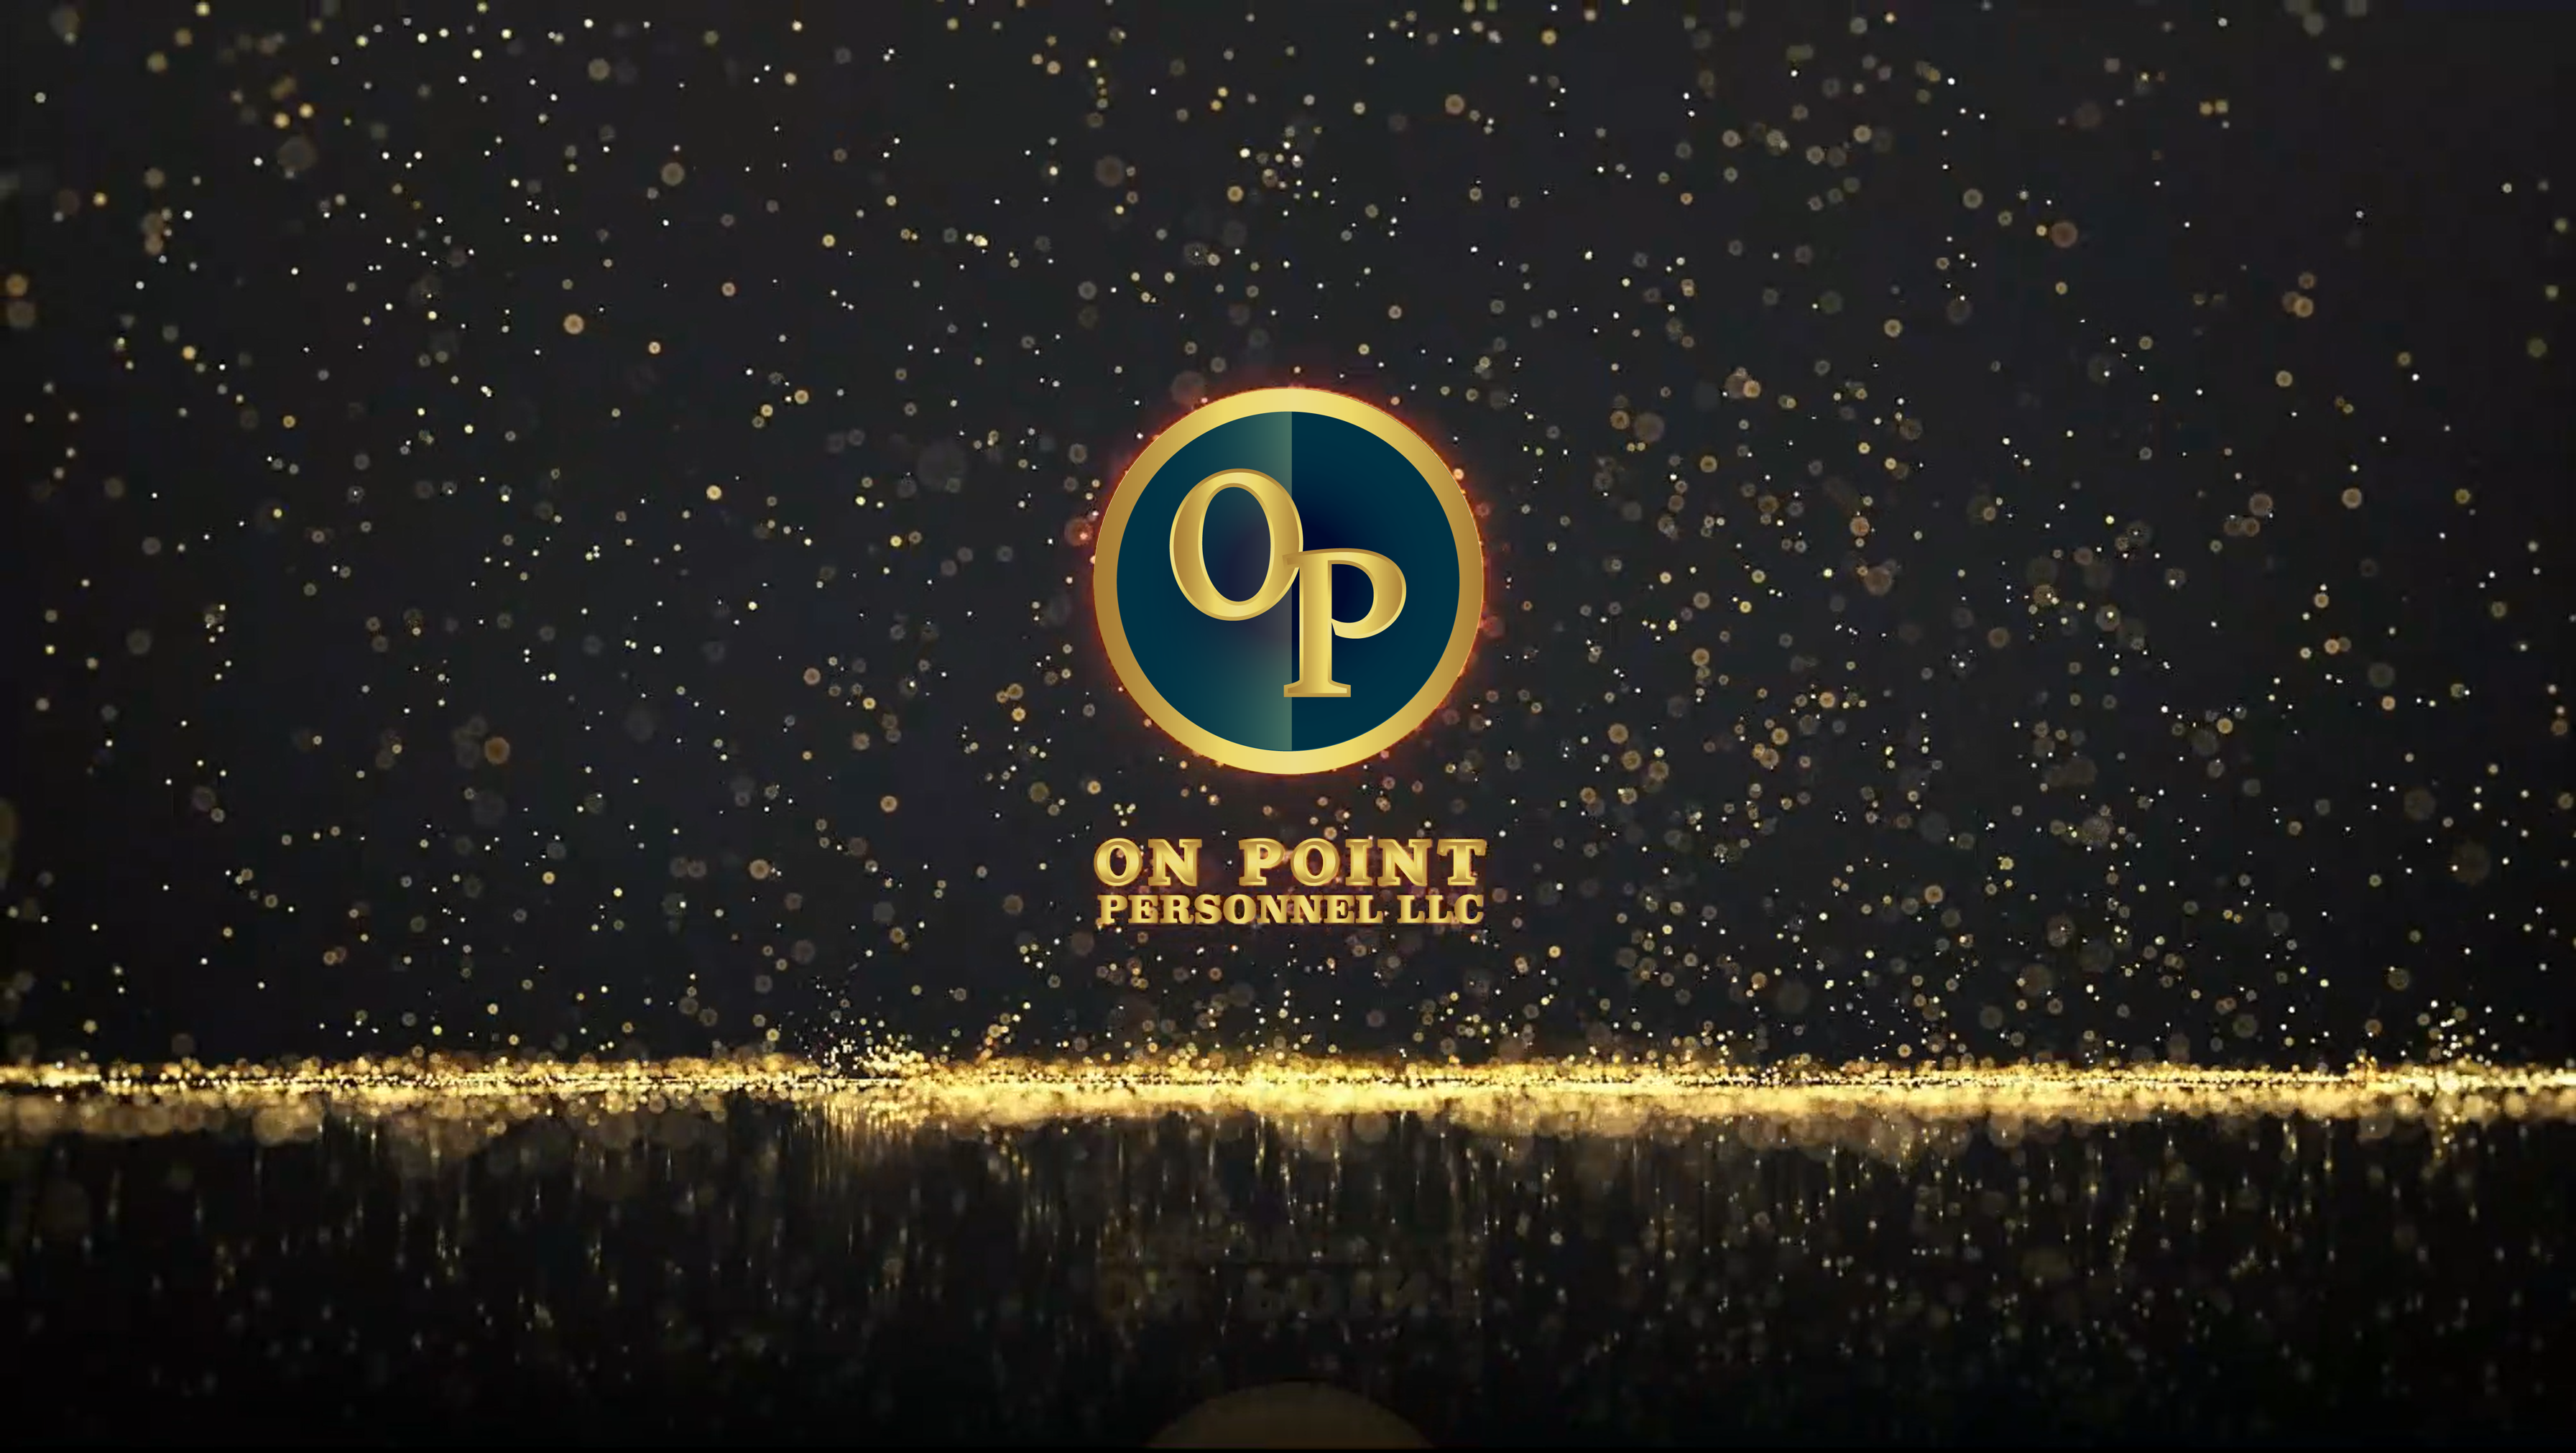 On point Personnel - On Point Personnel